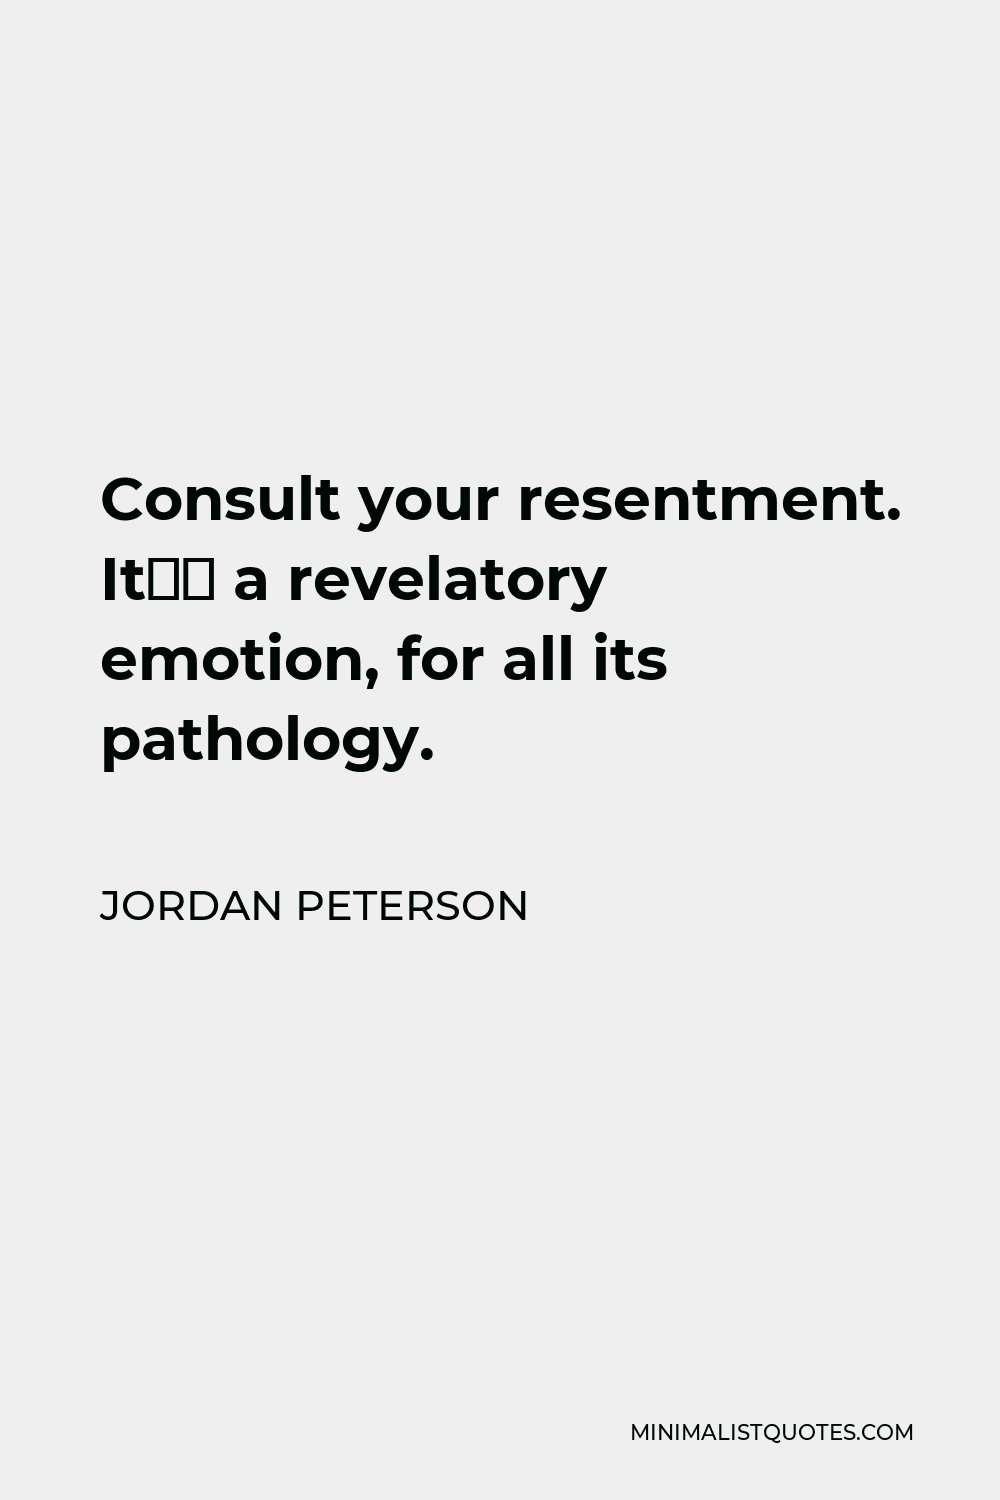 Jordan Peterson Quote: Consult your resentment. It's a emotion, for all pathology.